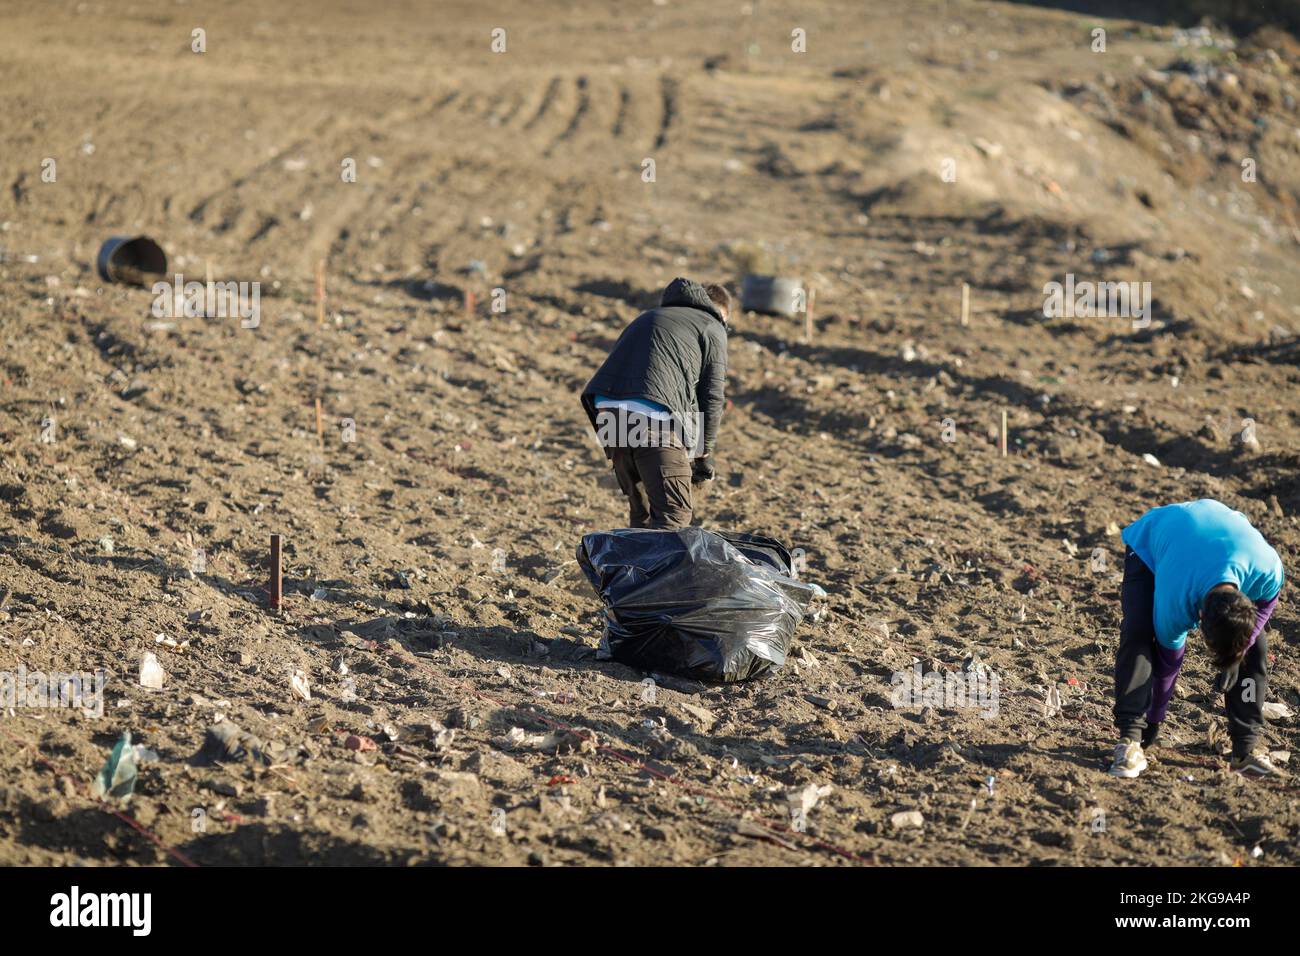 Two men gather garbage from a field before planting trees during a sunny autumn day. Stock Photo